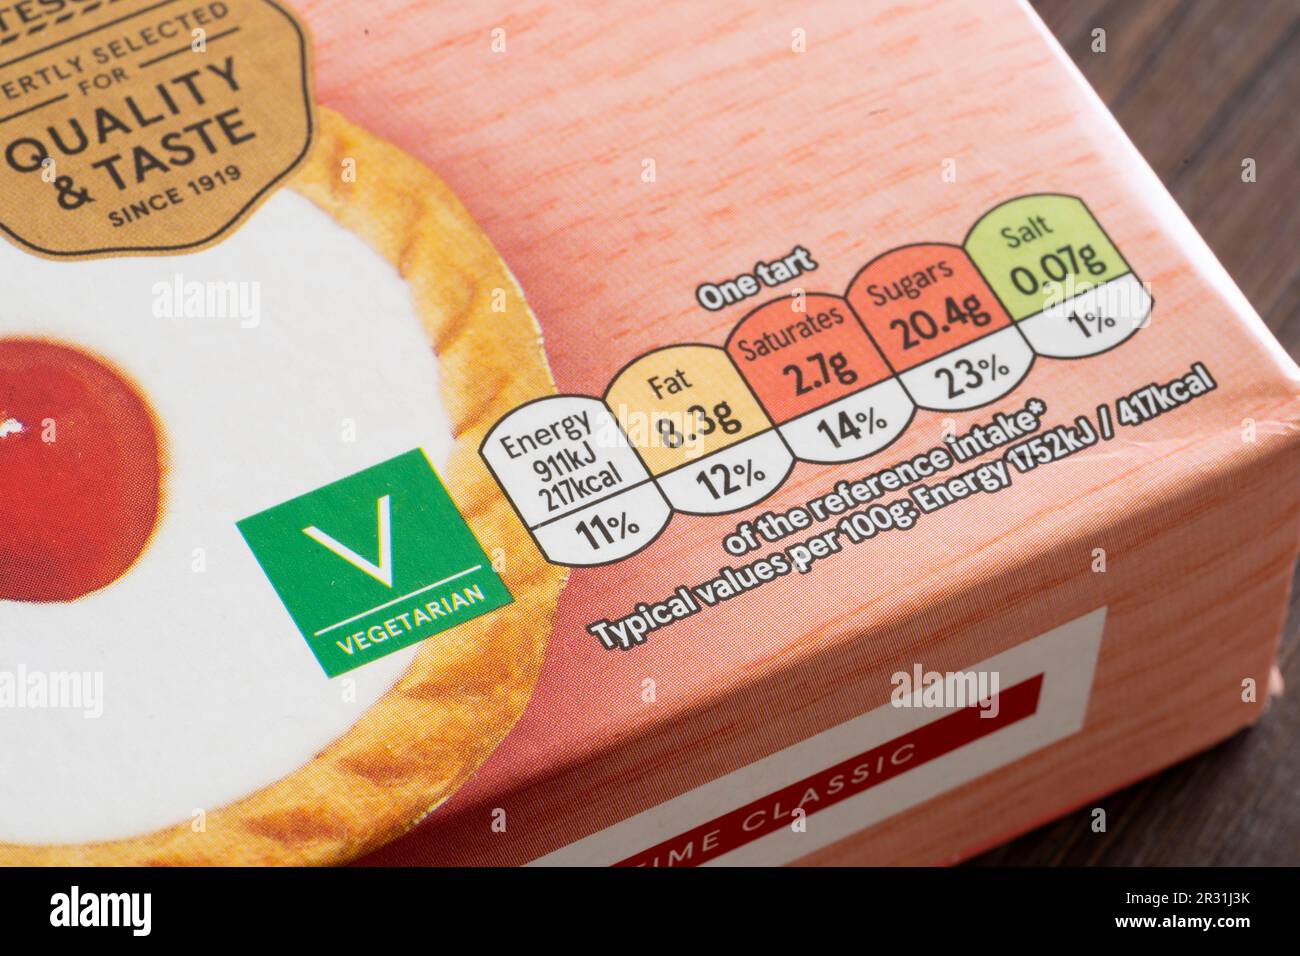 Front of pack food nutrition and vegetarian label on Tesco own brand cherry bakewell tarts, England. Concept: nutritional labellingm sugar content Stock Photo